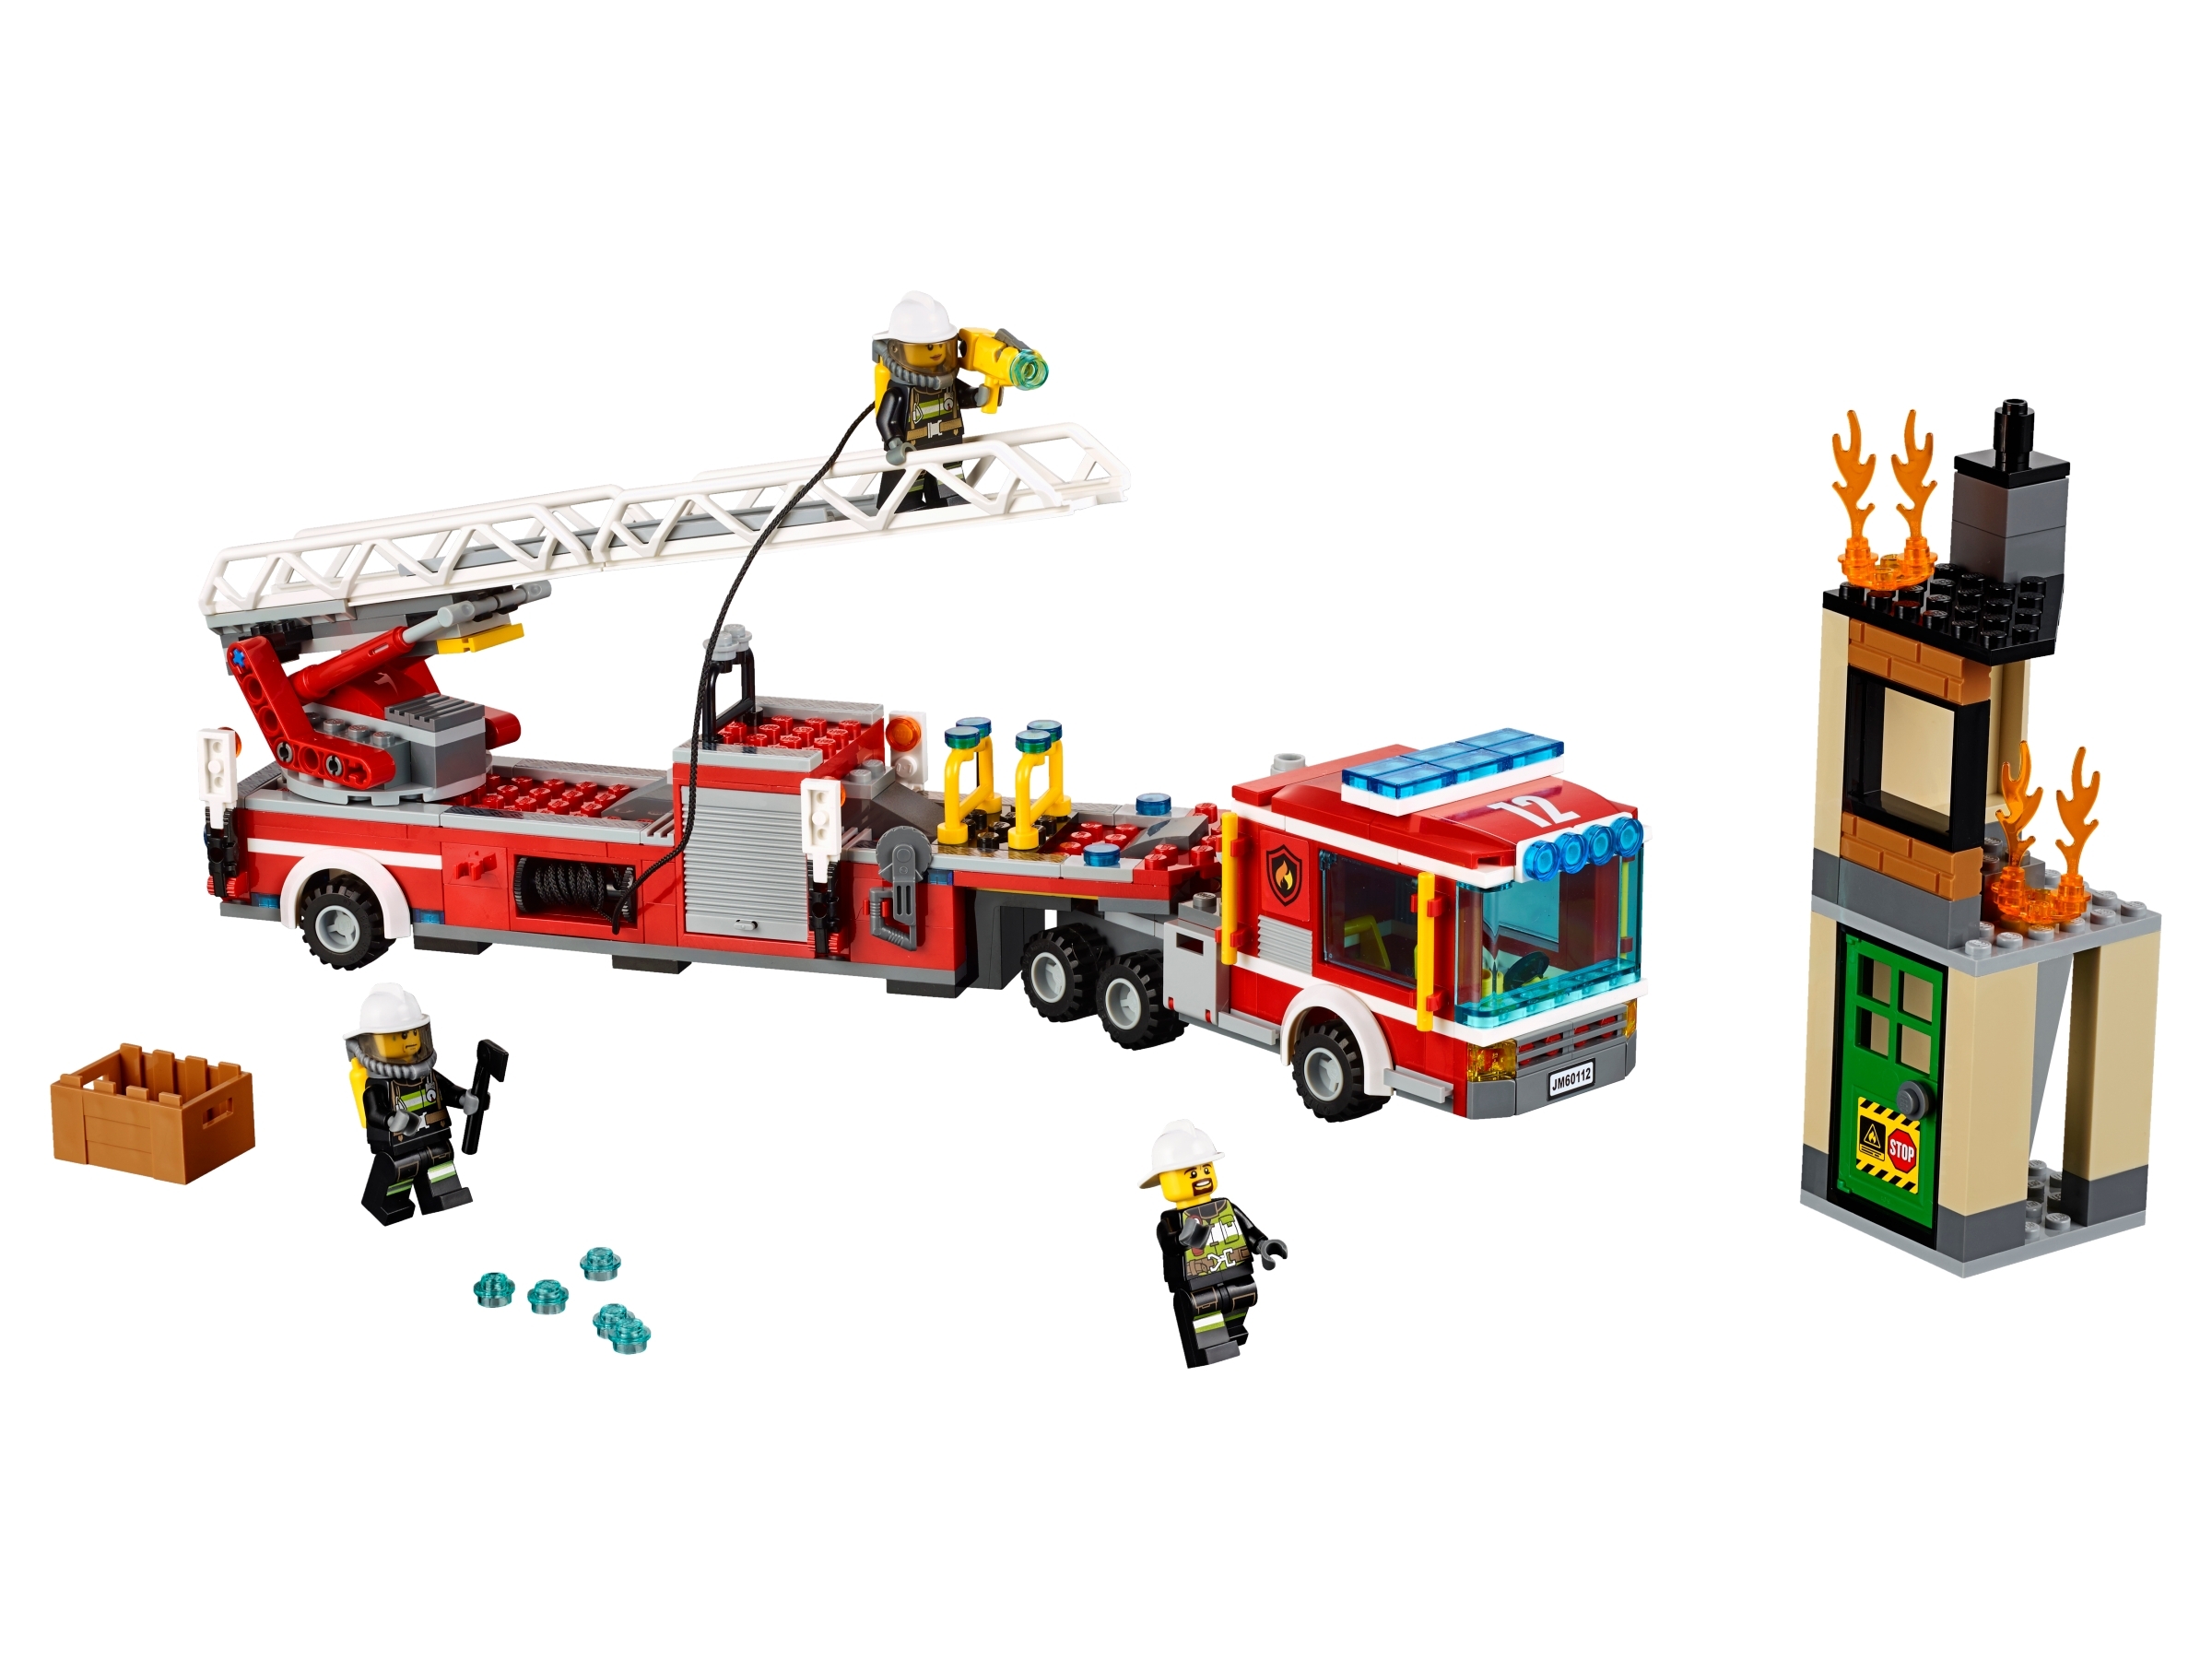 Fire Engine 60112 | City | Buy online at Official LEGO® Shop US